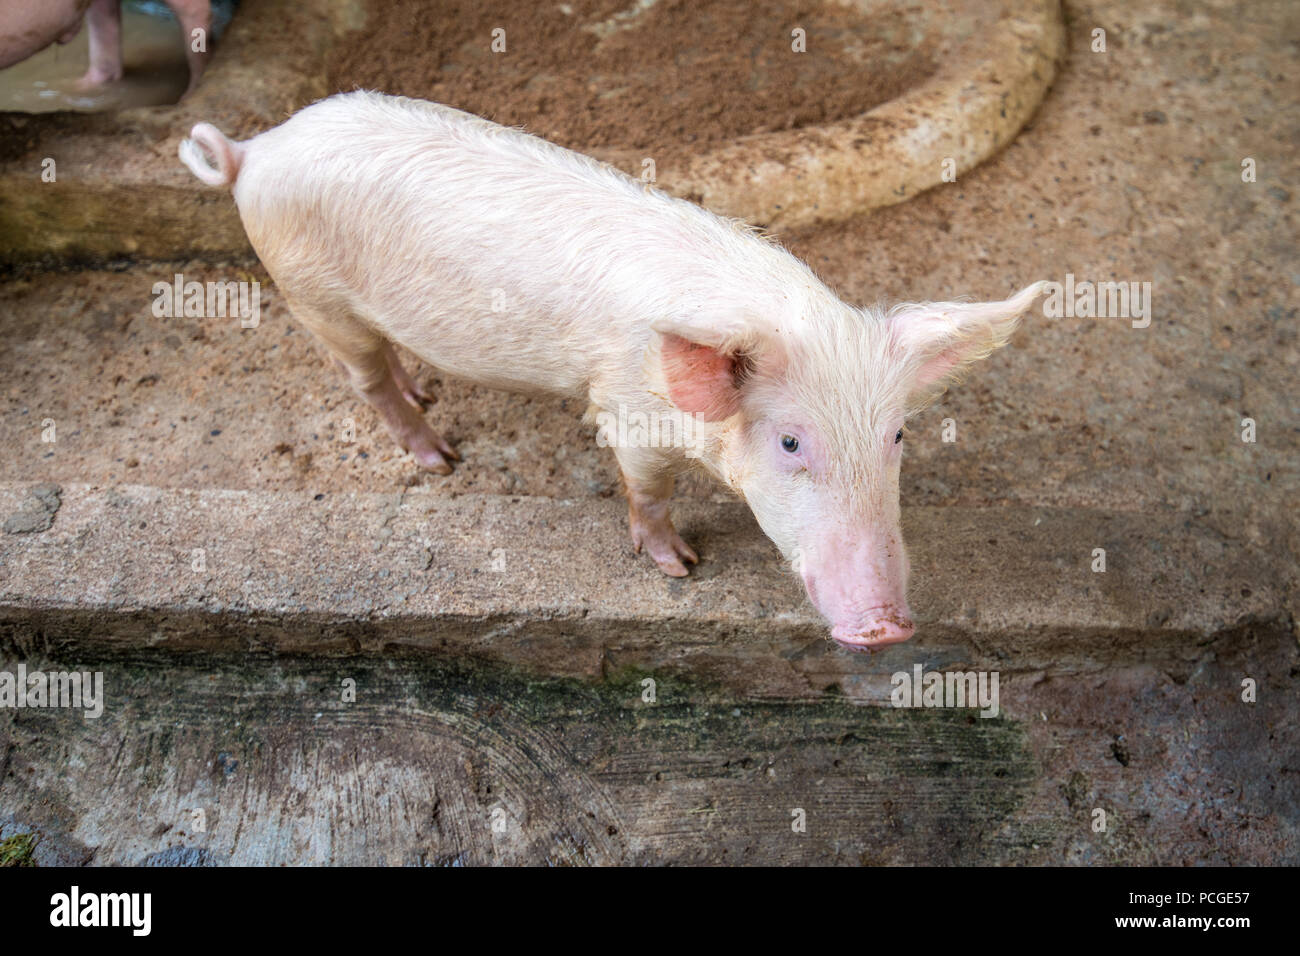 A pig (Sus) with a long snout looks at the camera in Ganta, Liberia Stock Photo